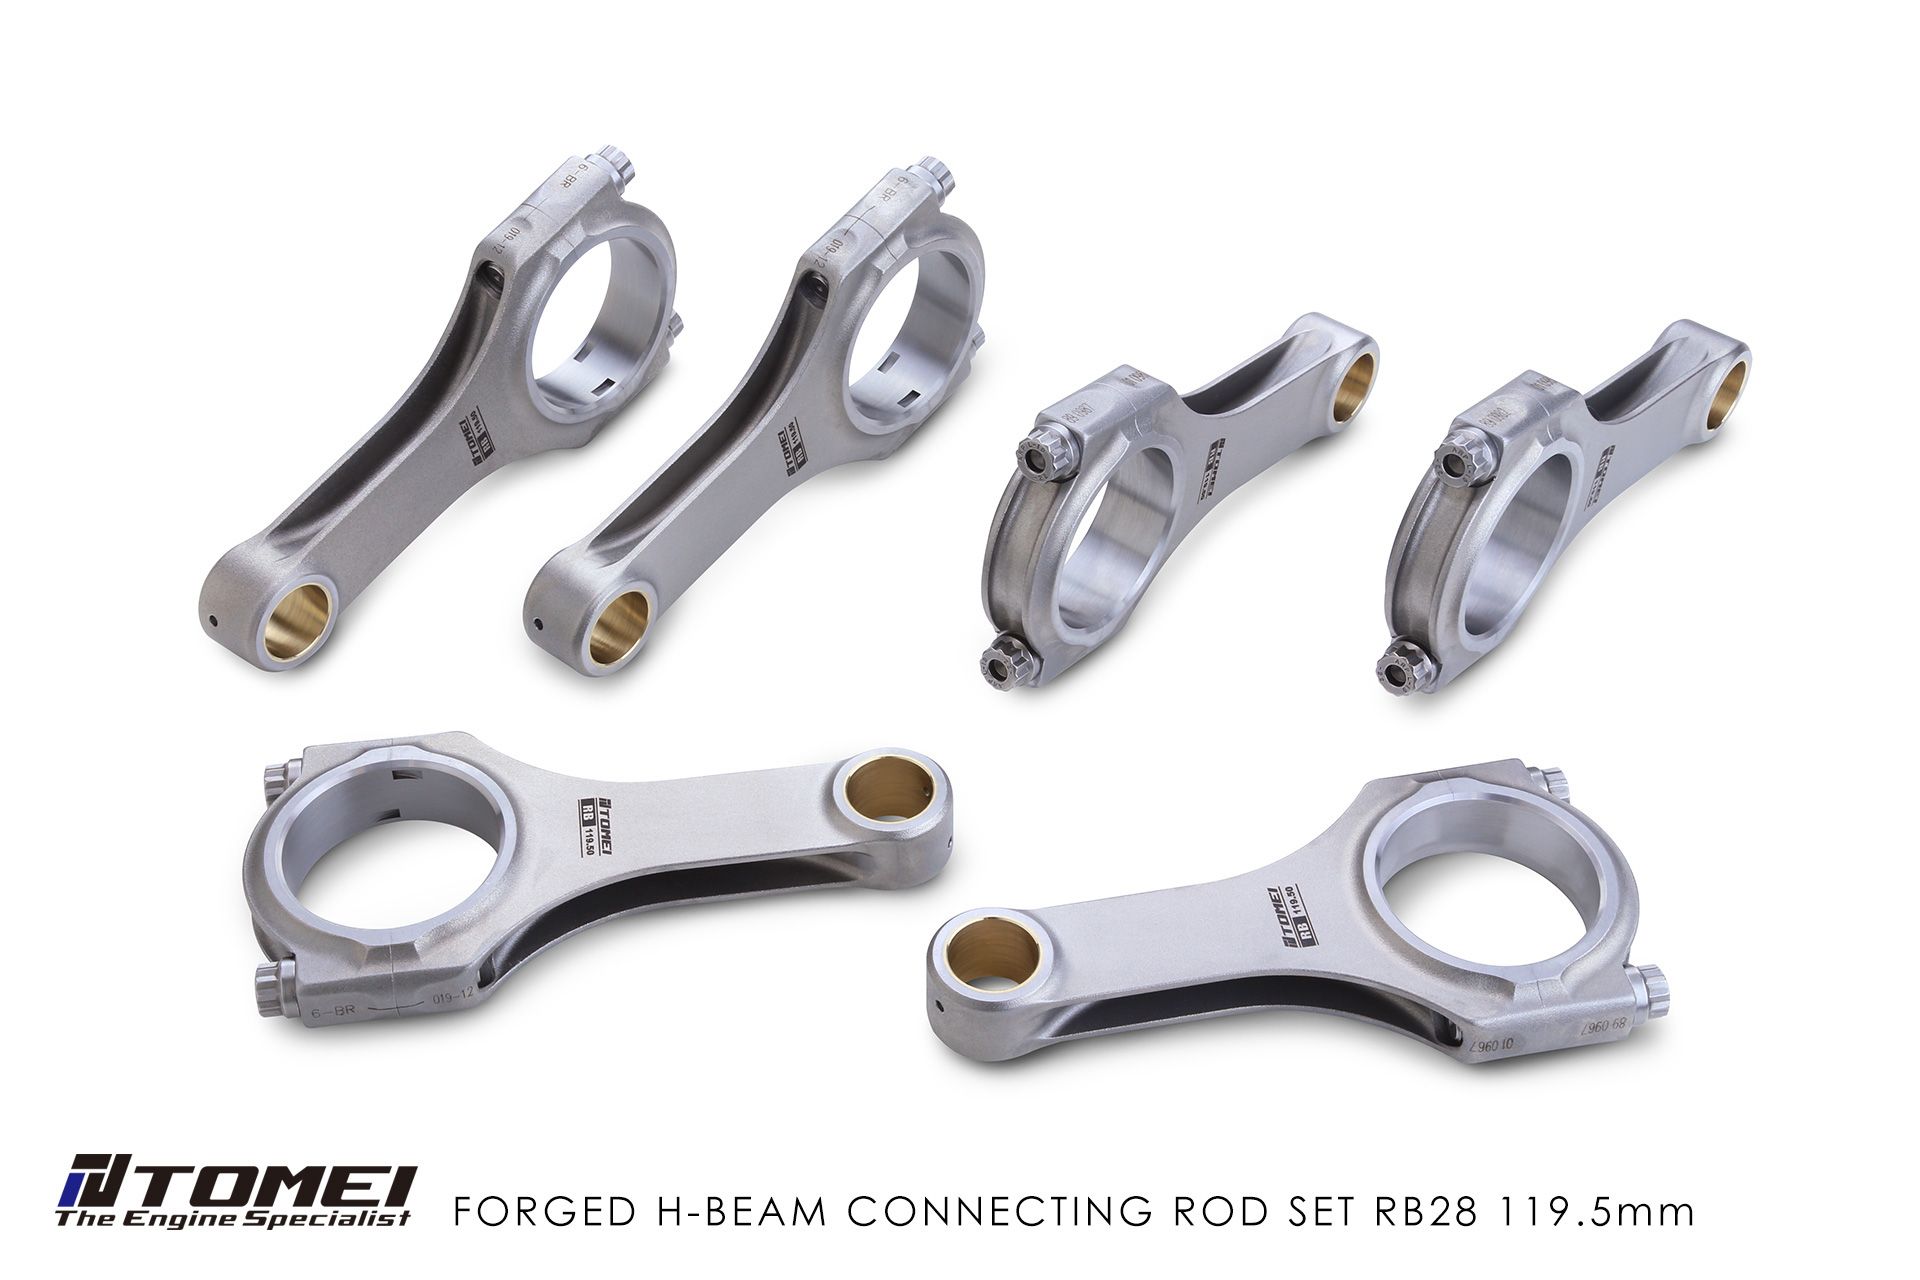 Tomei Forged H-Beam Connecting Rod Set RB28 119.5mm